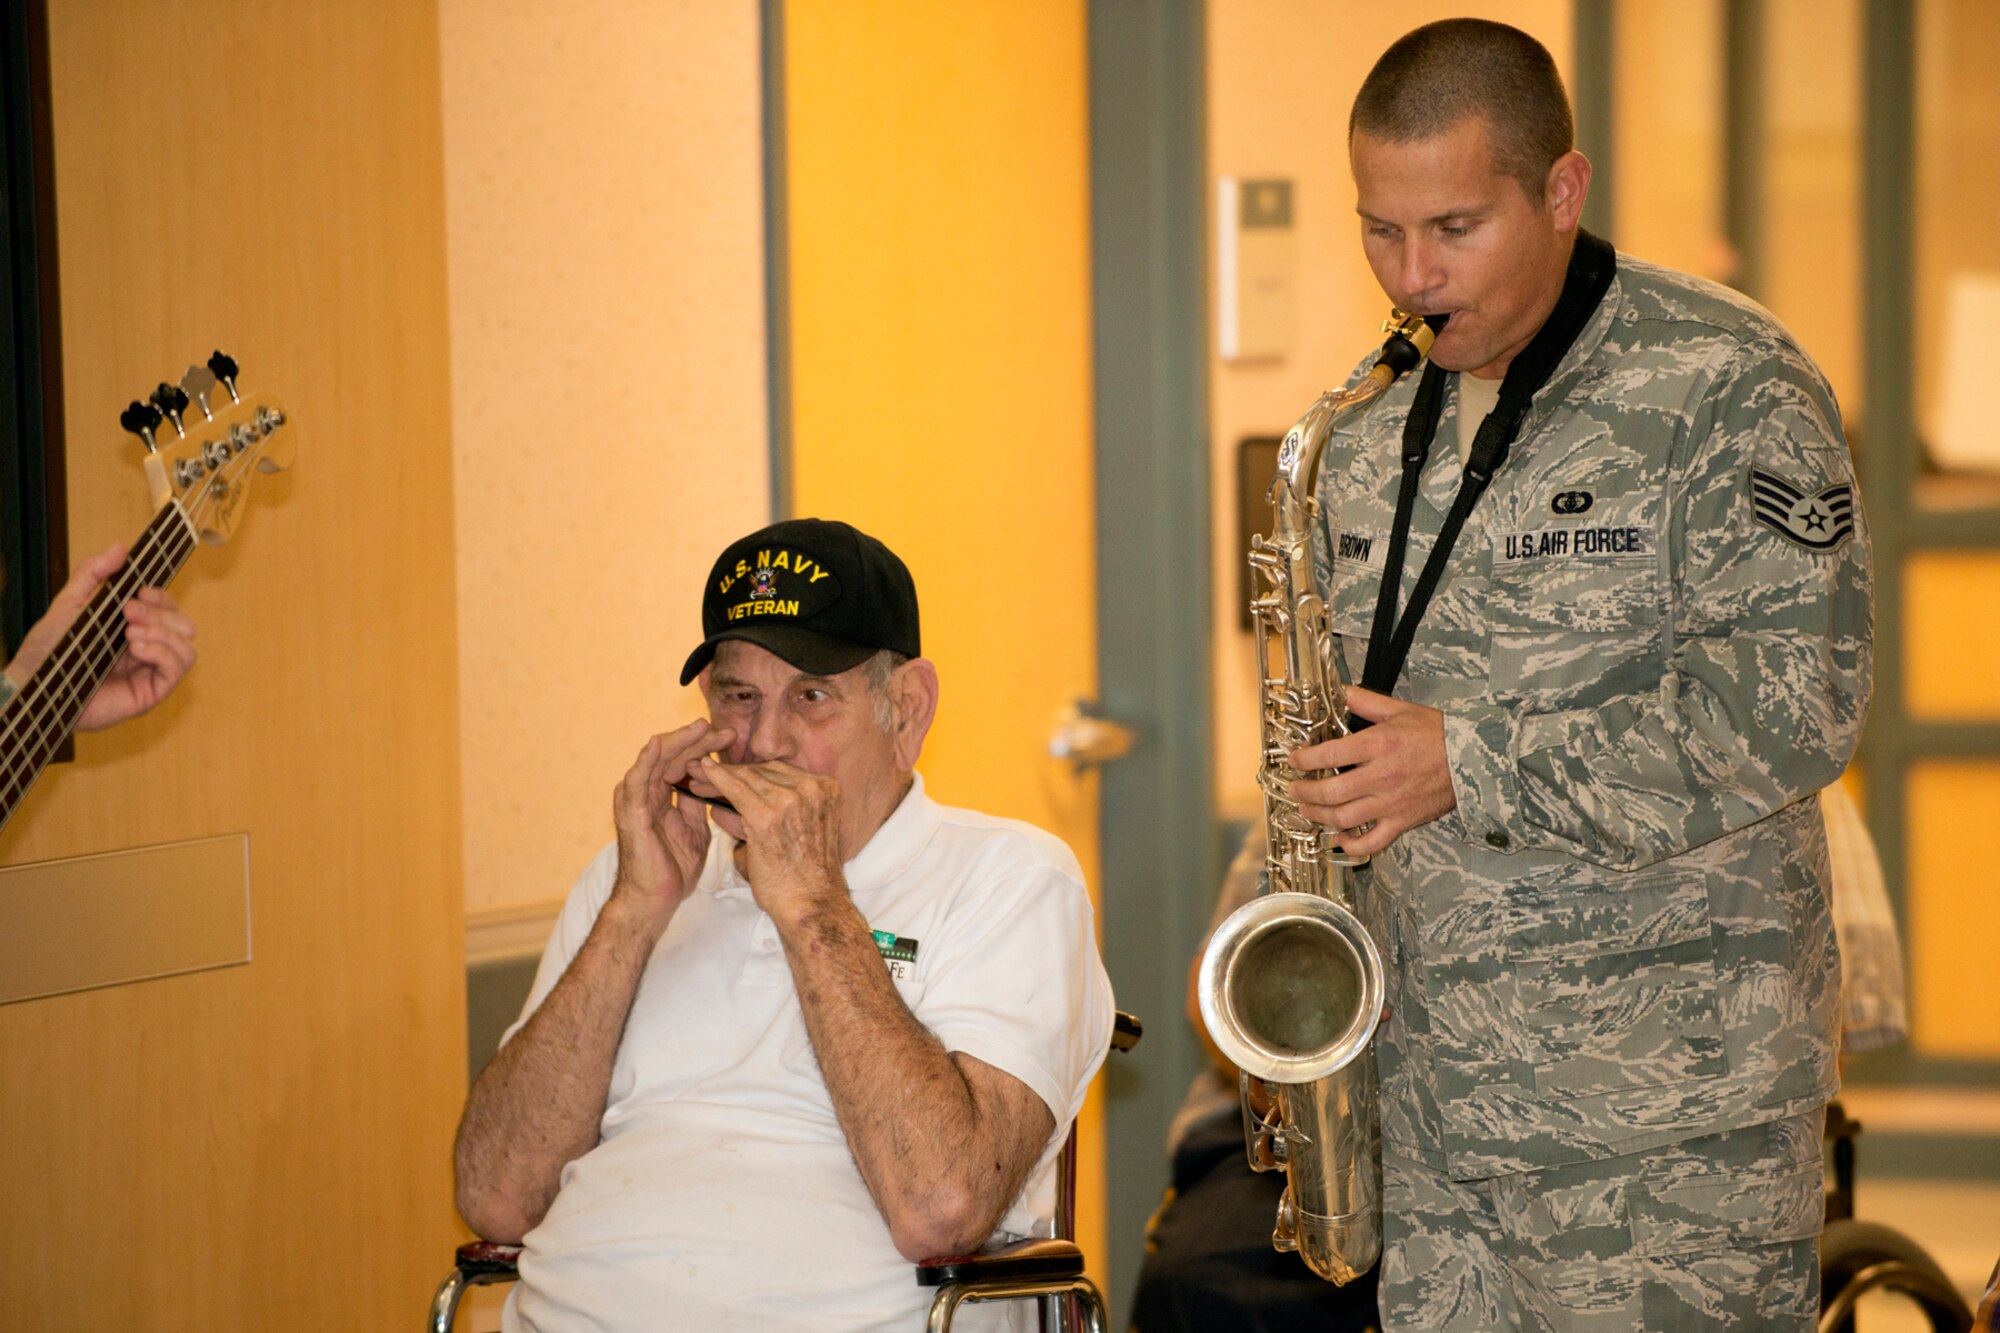 A.J. Bacha, a Korean War veteran, plays along with his harmonica beside Staff Sgt. Cody Brown at the Northwest Louisiana Veterans Home, Nov. 6, 2012, Bossier City, La. Brown is a saxophone player in the U.S. Air Force Band of the West and his ensemble performed at the veterans home. (U.S. Air Force photo by Master Sgt. Greg Steele/Released)